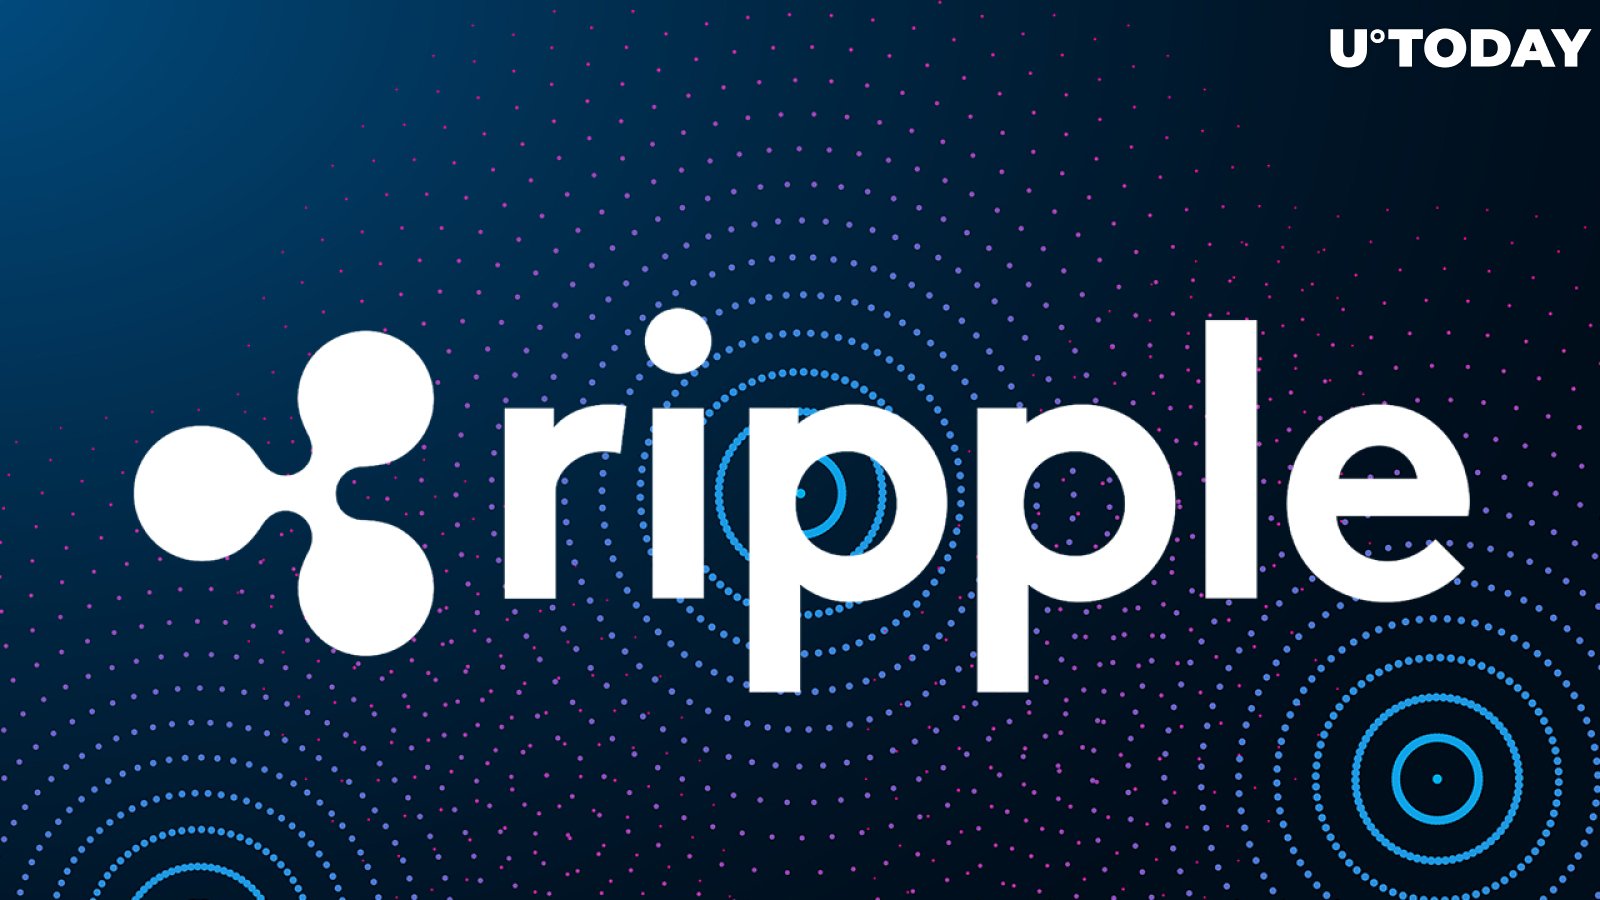 Ripple Website Design Goes Through "Extreme Makeover," Featuring Ripple Liquidity Hub